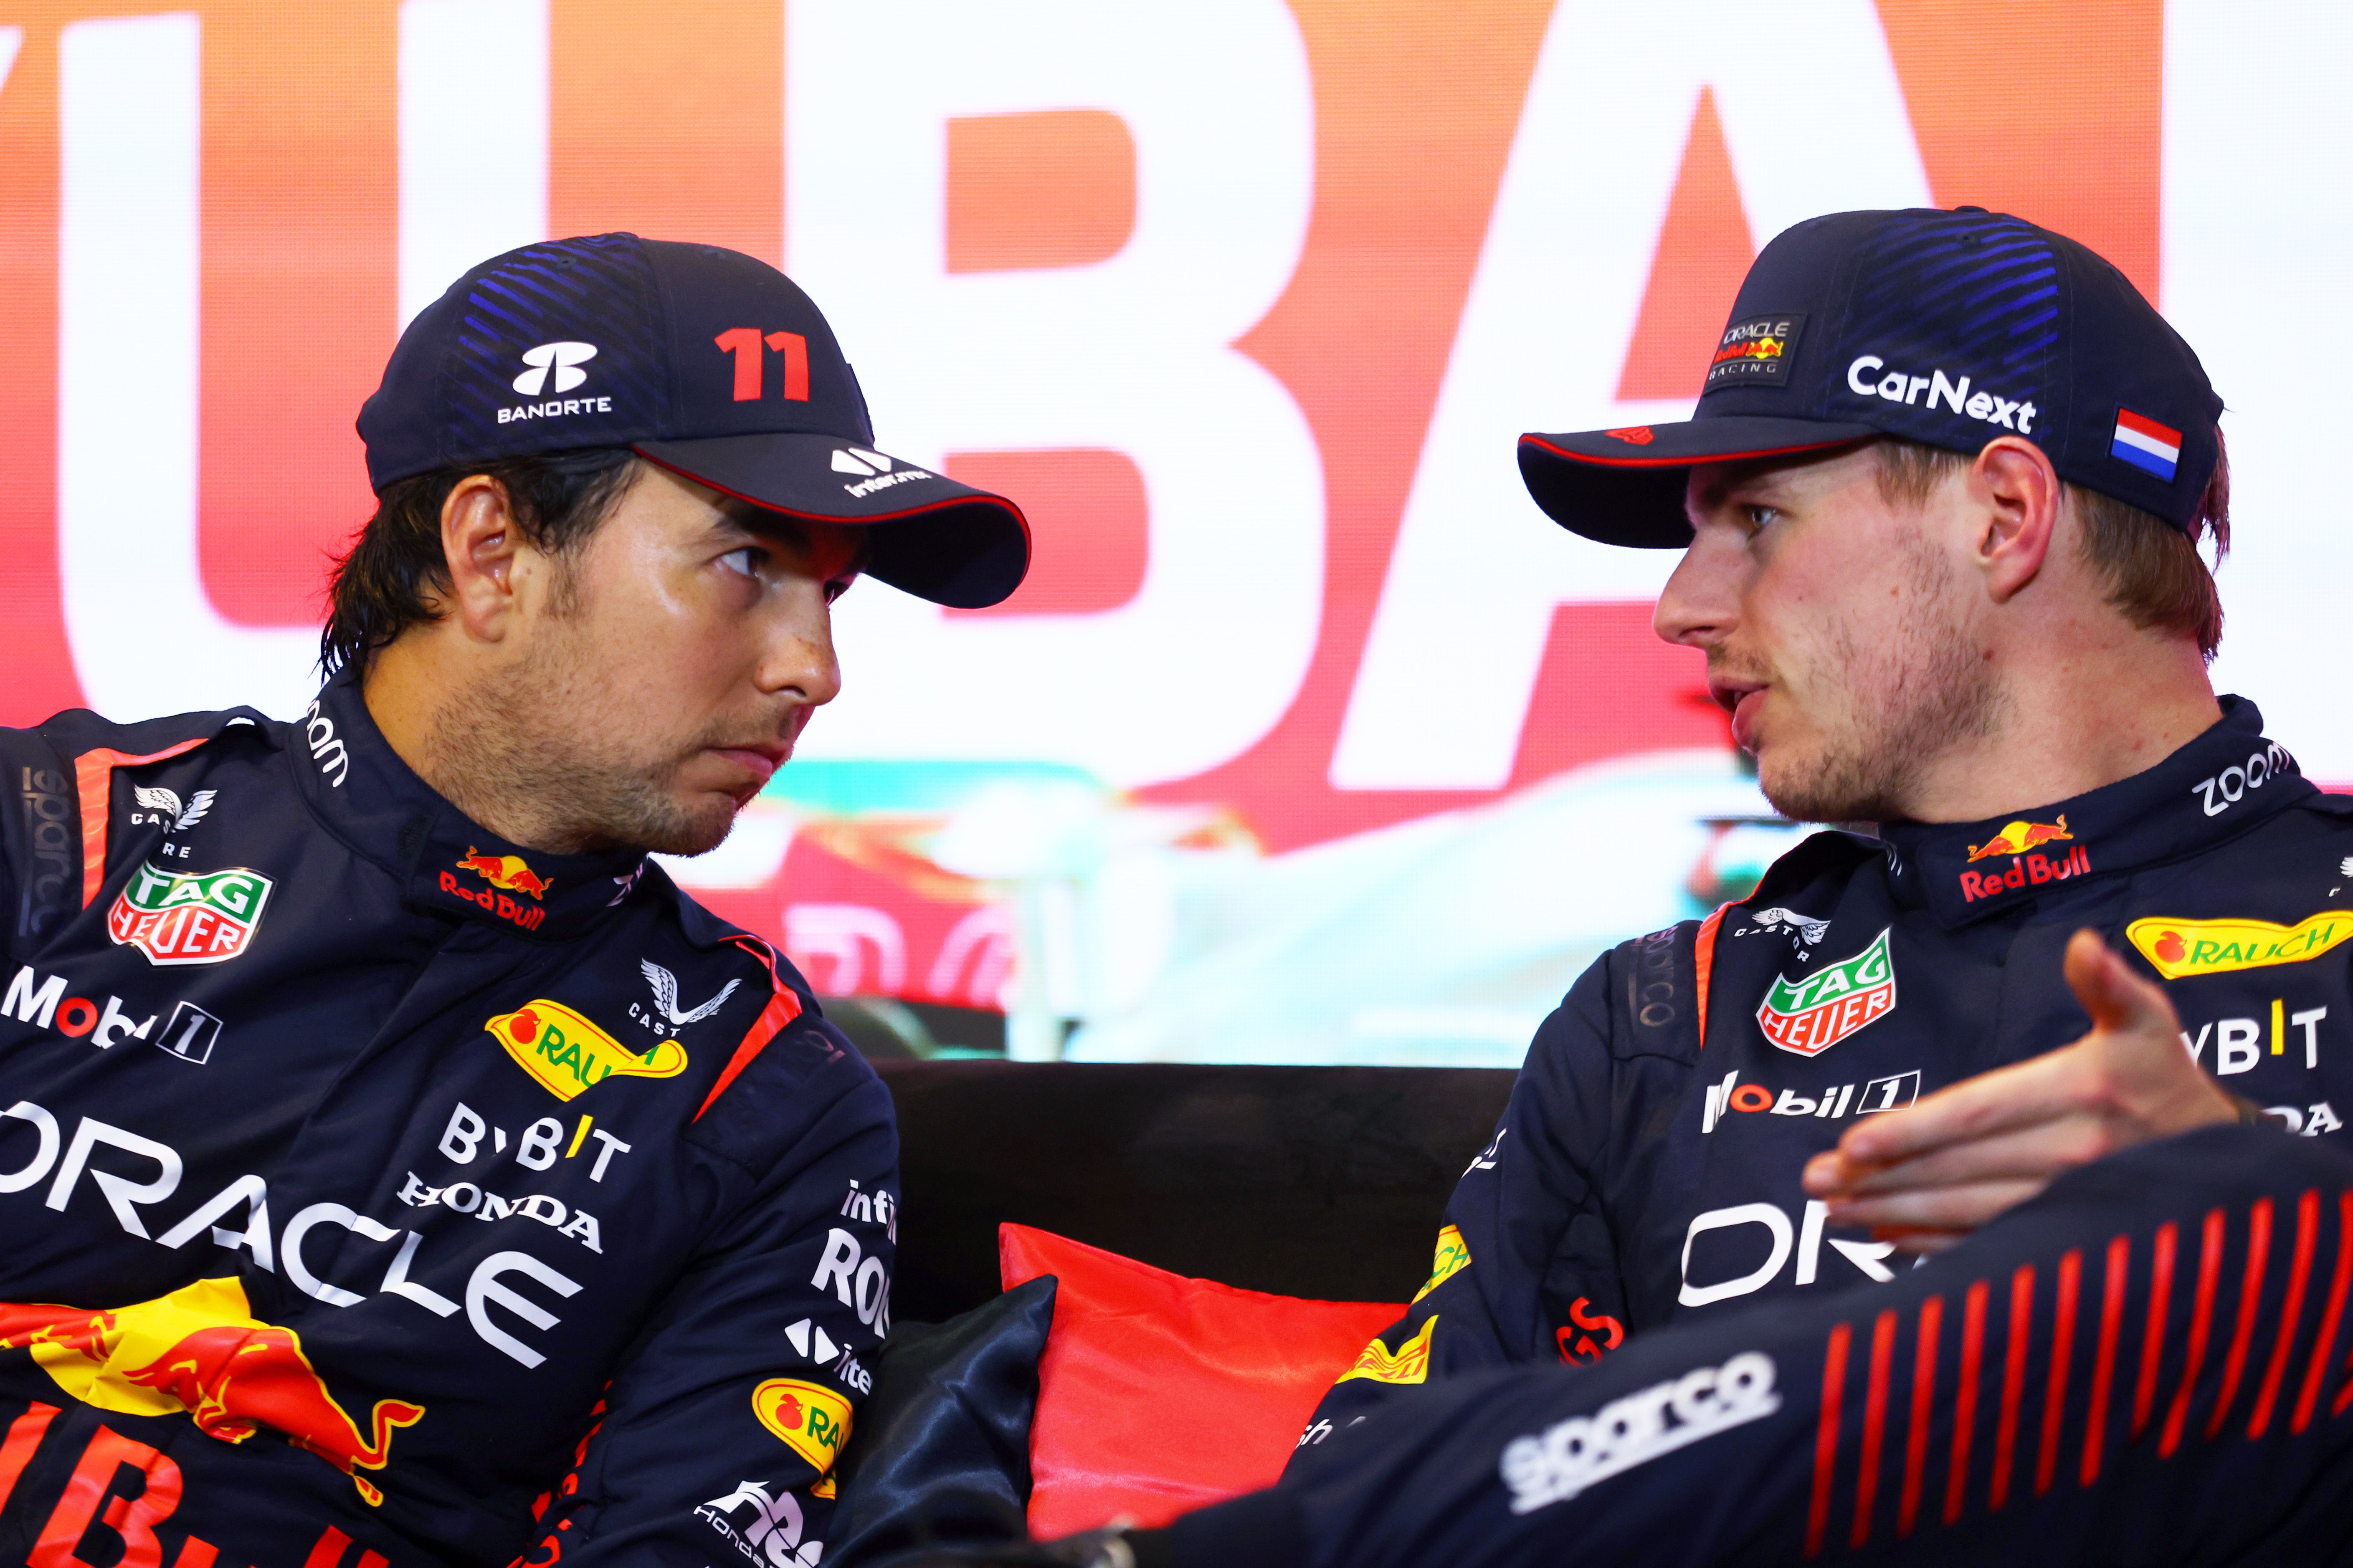 Sergio Perez must now take advantage of Max Verstappen’s angsty persona if he wants to win the World Championship